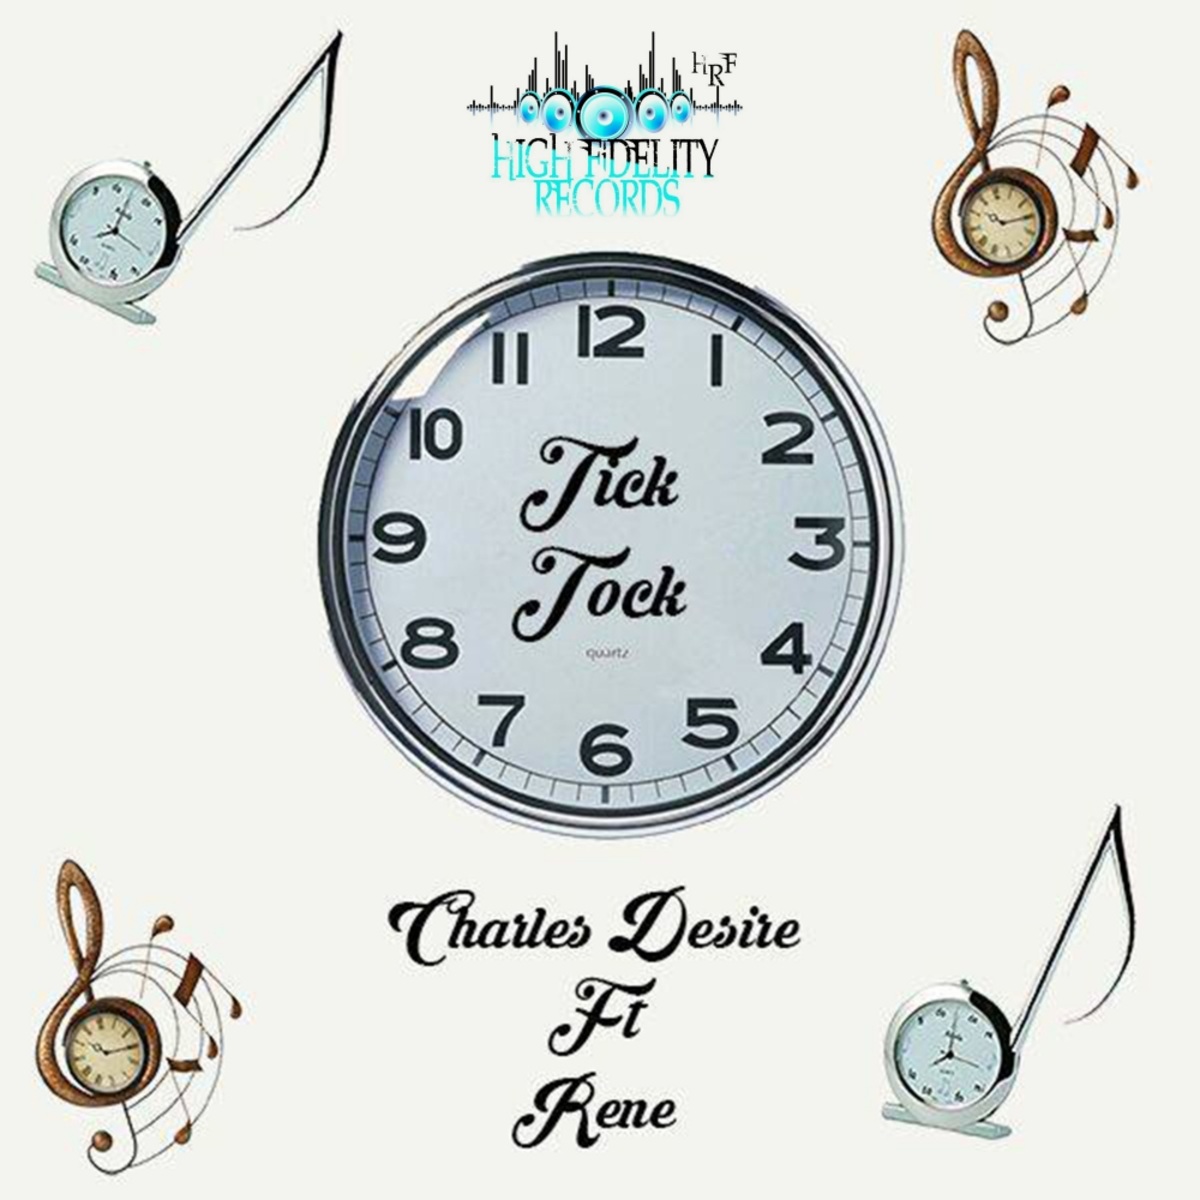 Charles Desire - Tick Tock / High Fidelity Productions